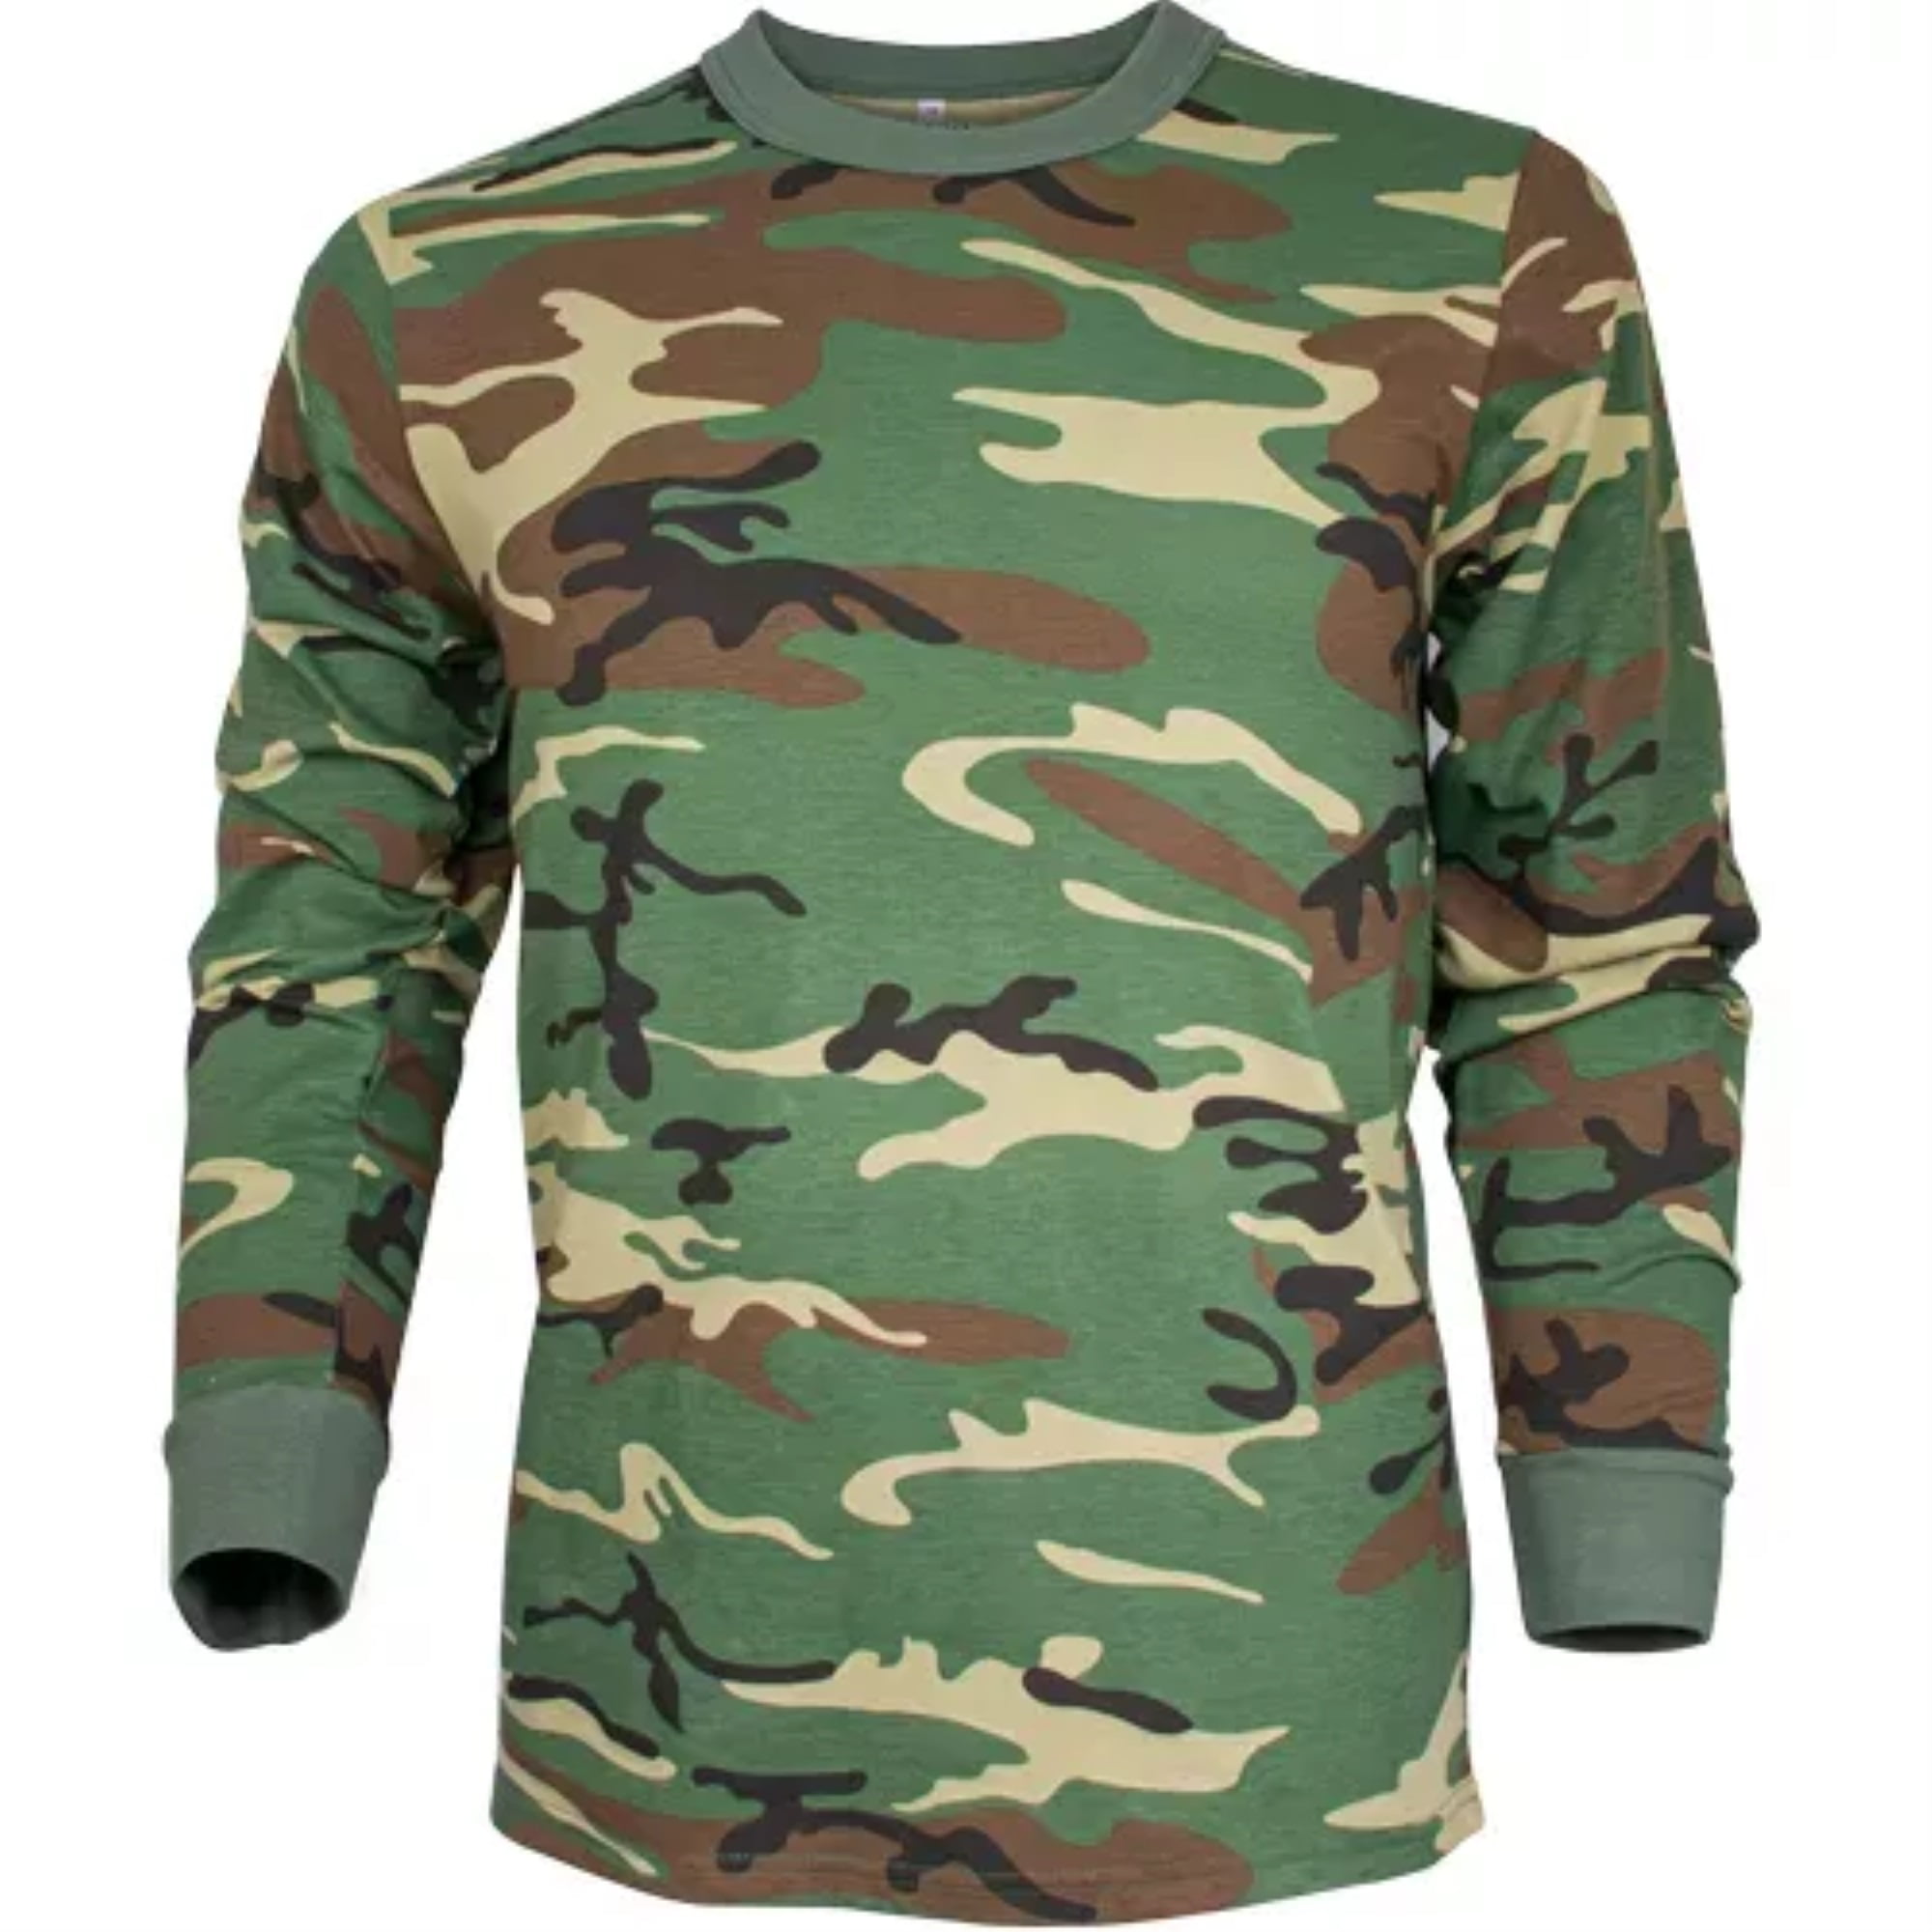 Mens Game Long Sleeve Camouflage Army Woodland Top Camo Hunting Shooting Fishing